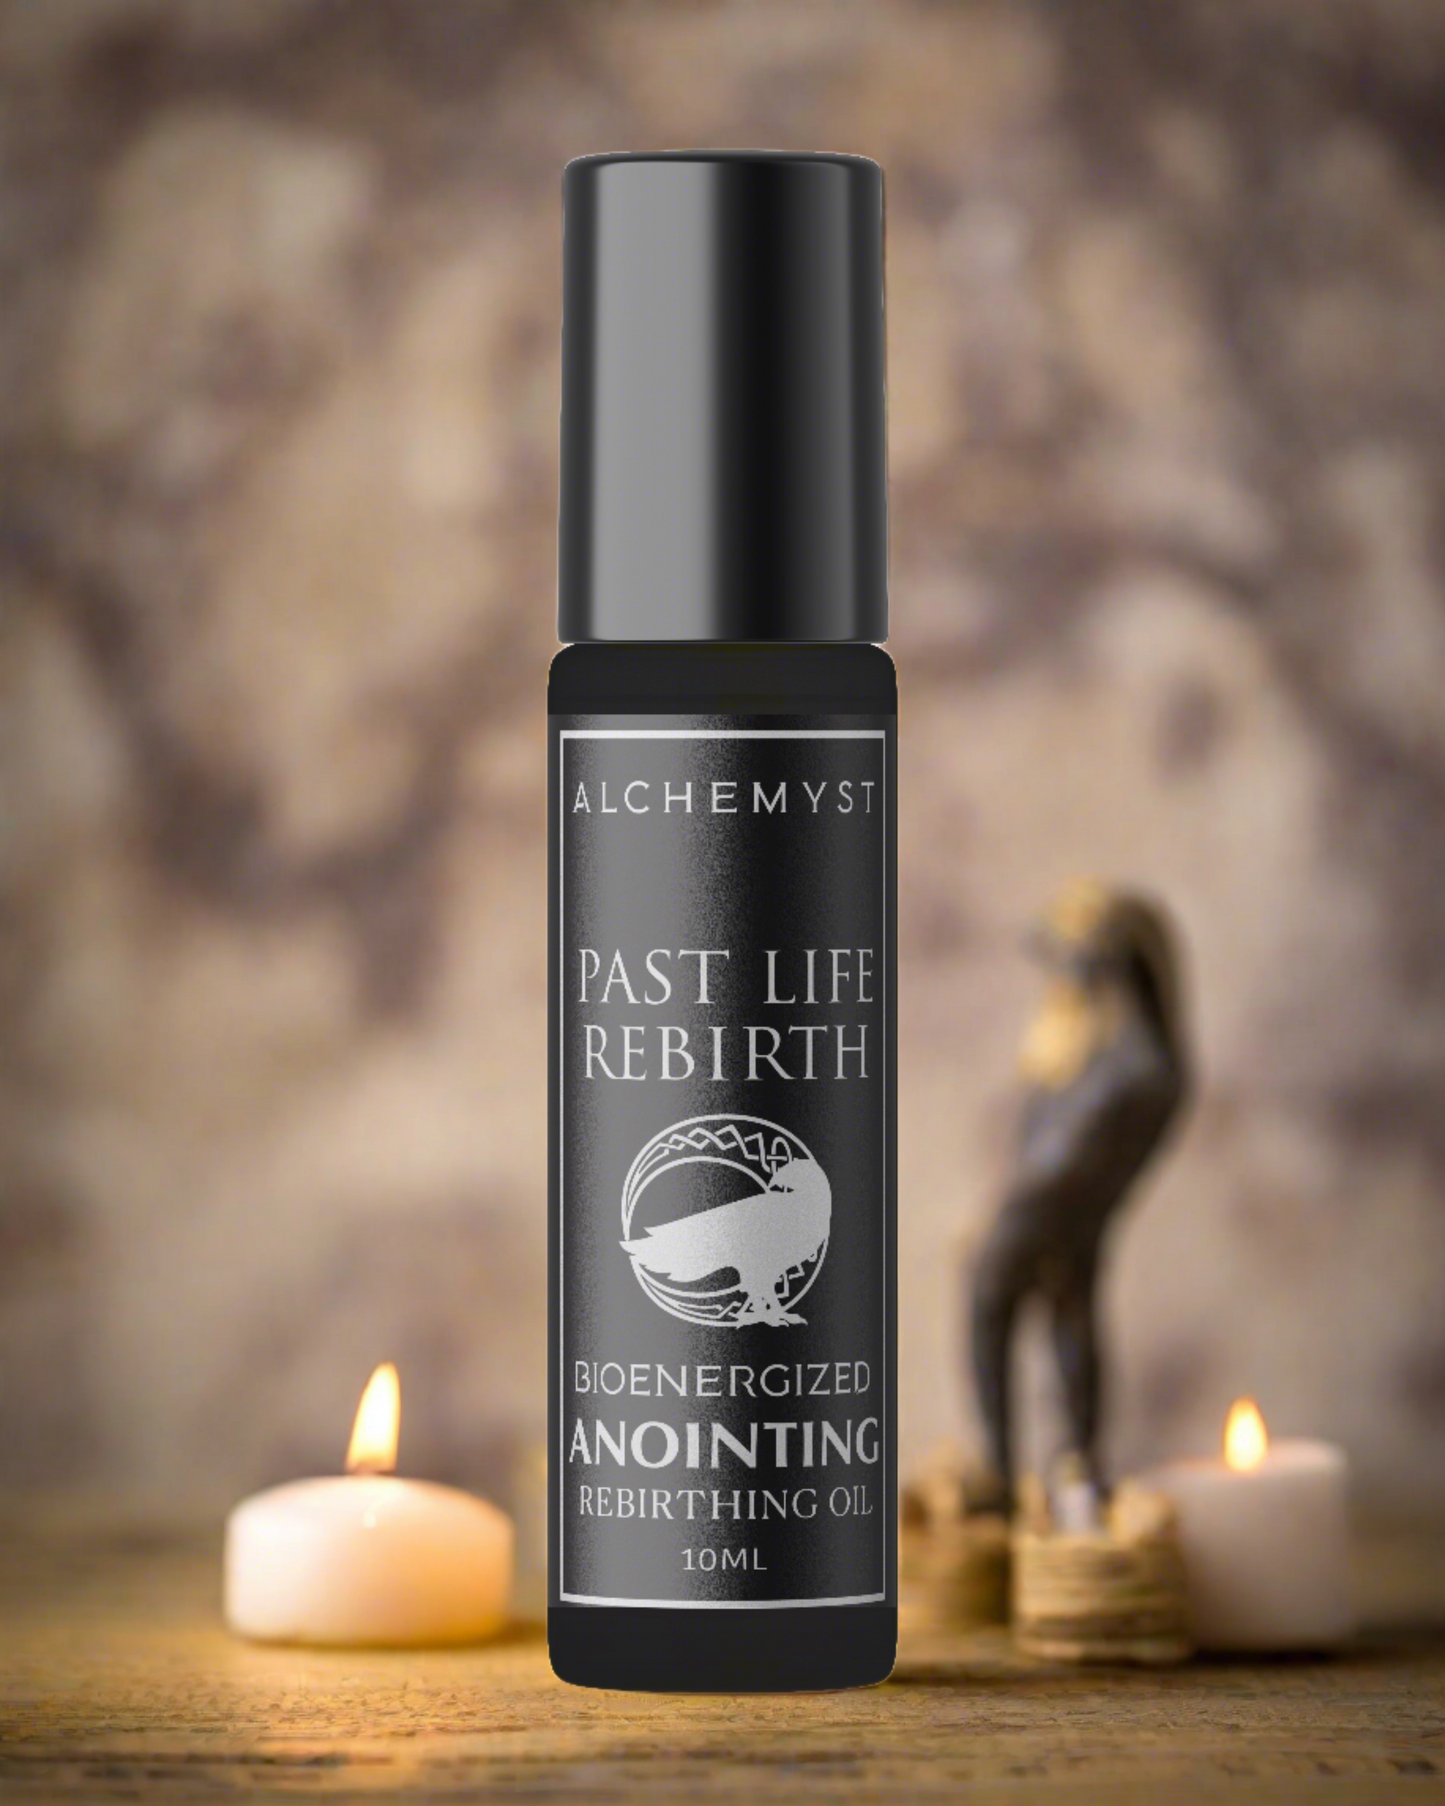 Past Life Rebirth | Bioenergized Oil for Meditation, Hypnotherapy, Past Life Regression Alchemyst Co